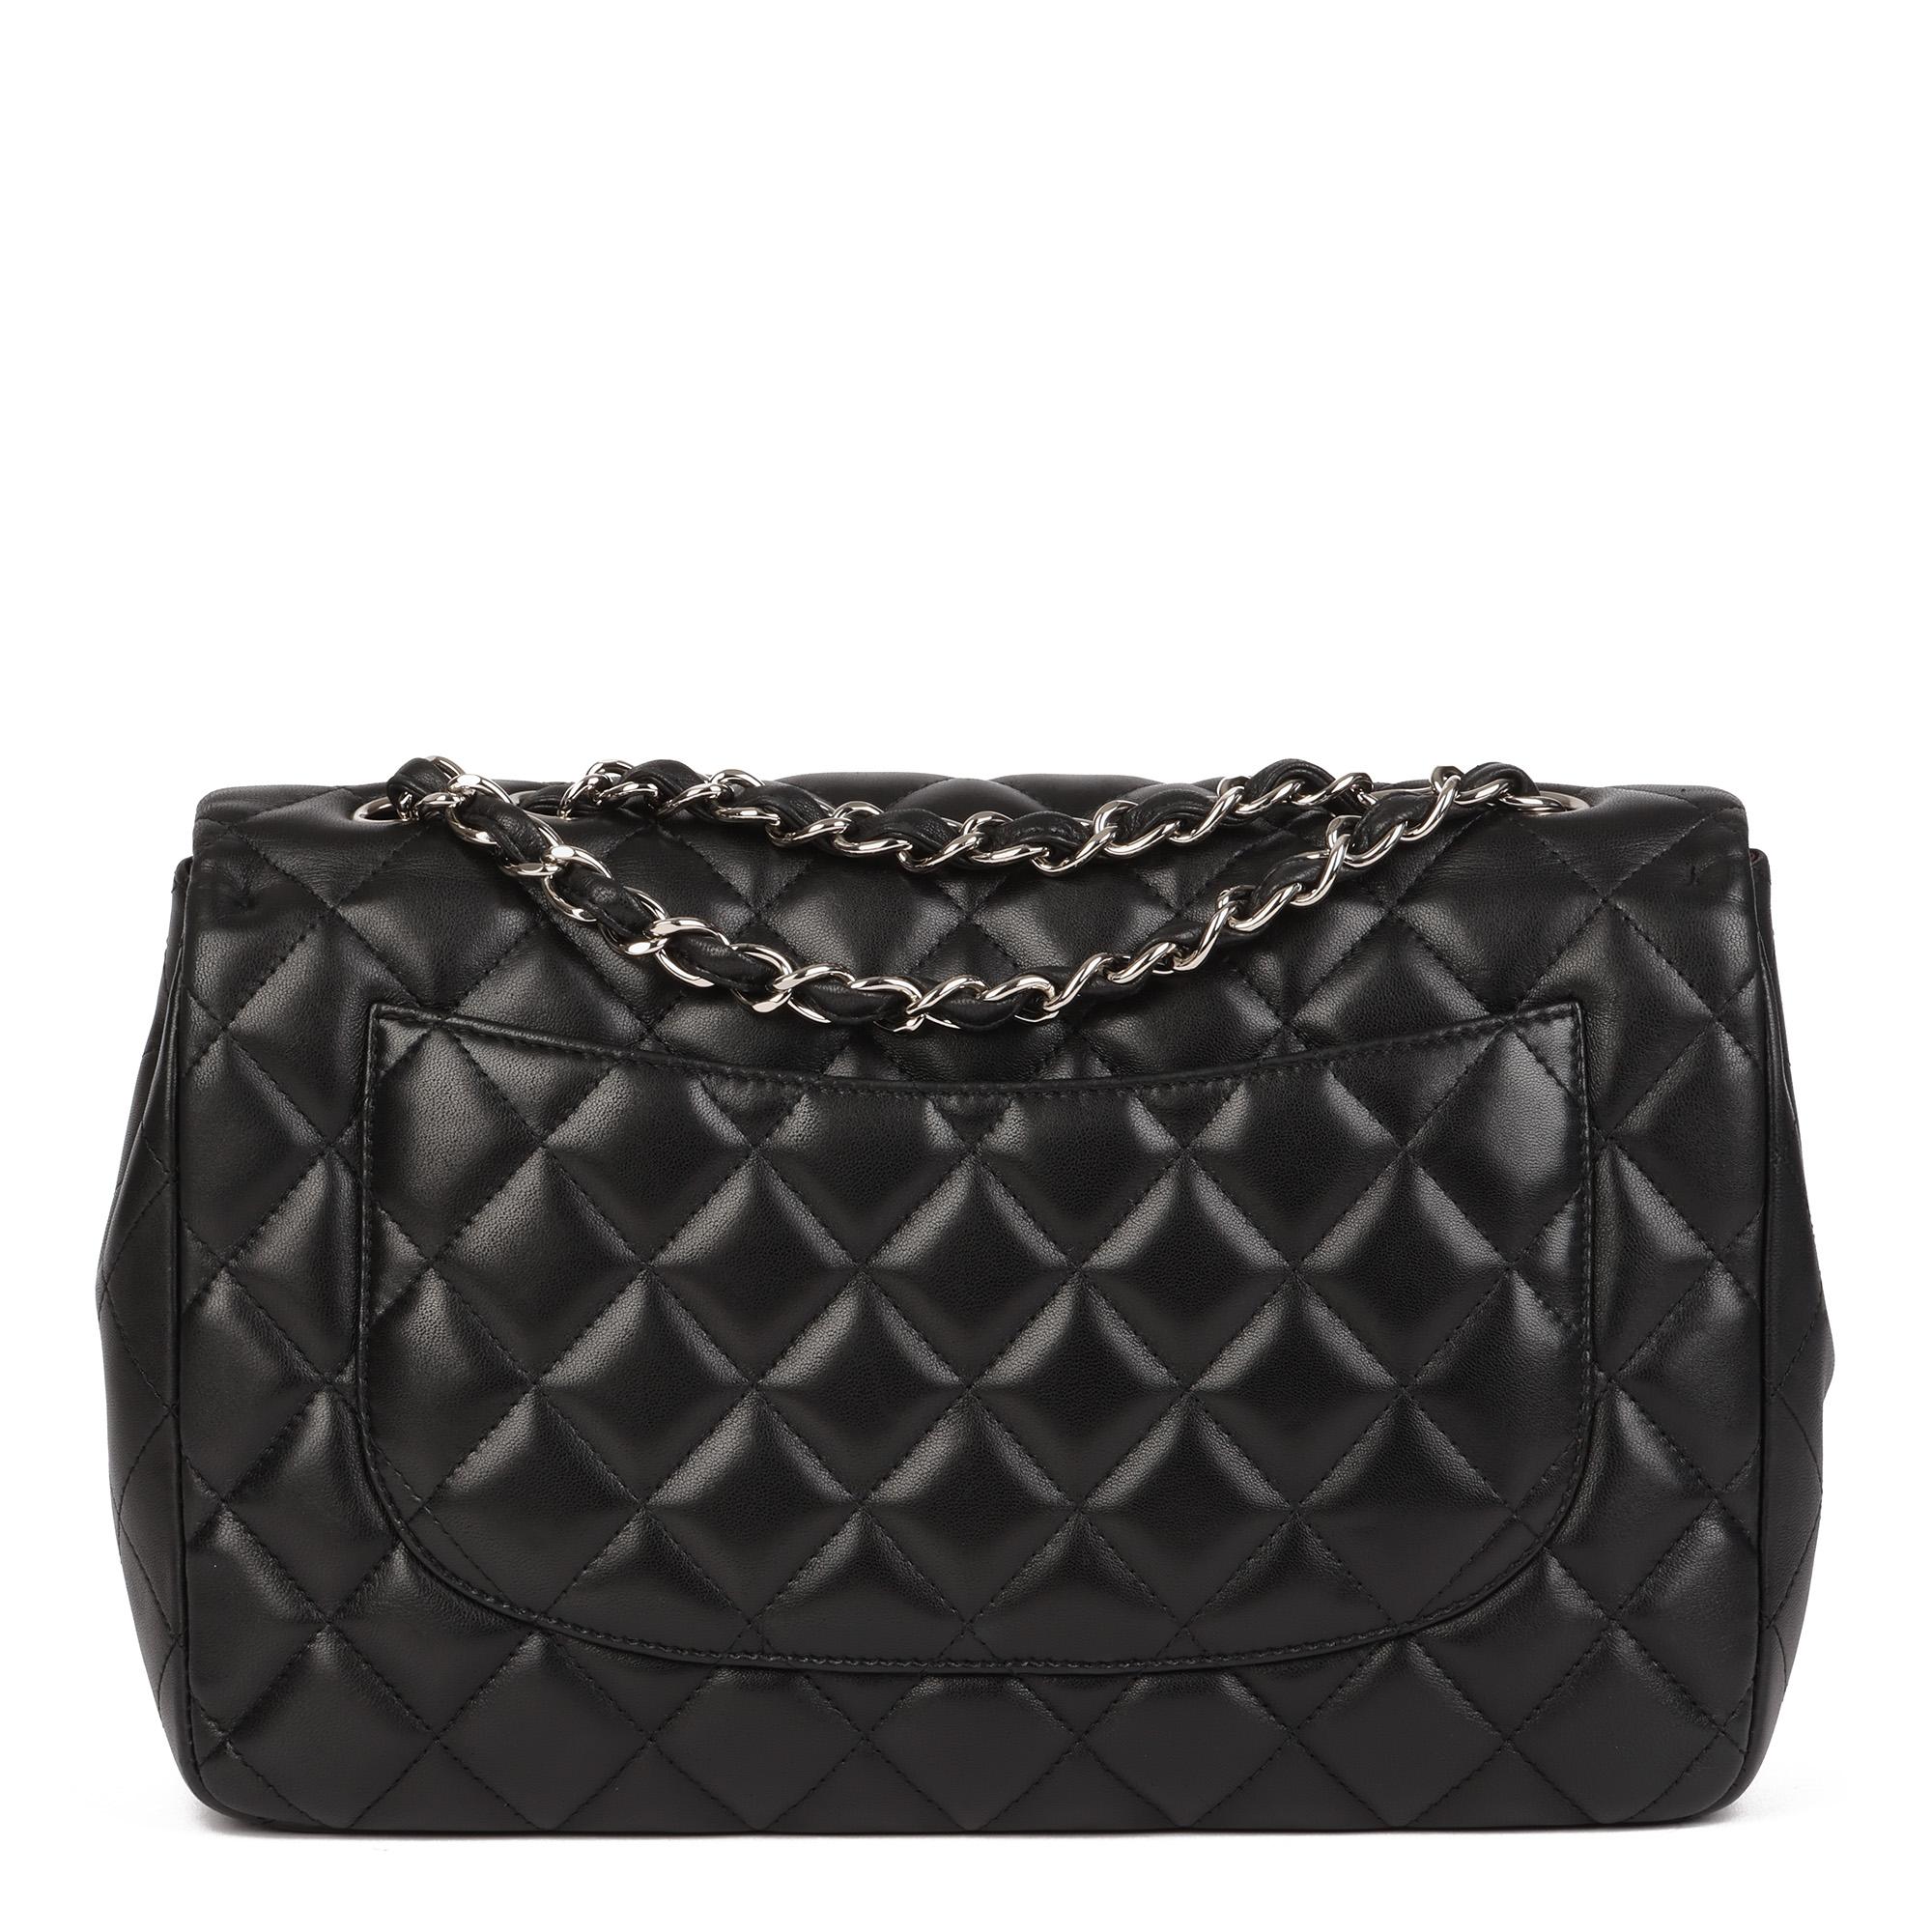 Chanel Black Quilted Lambskin Jumbo Classic Single Flap Bag 5